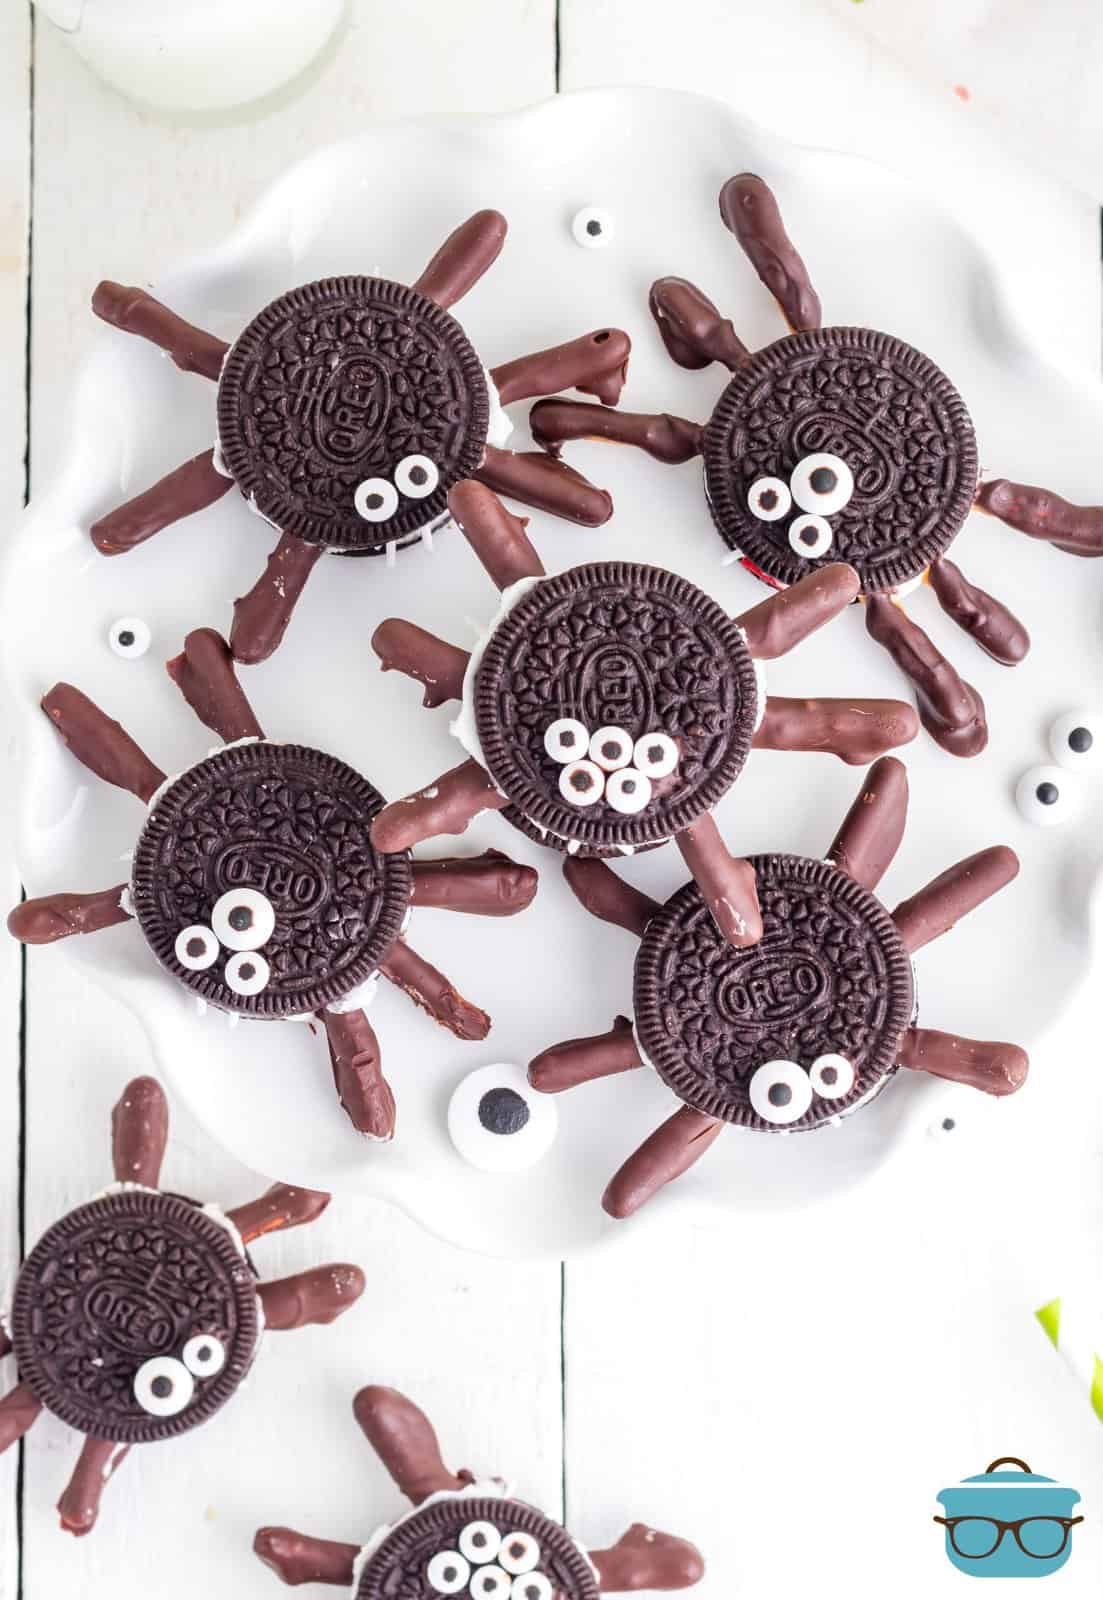 Overhead of Halloween Oreo Spiders on white plate showing eyes.